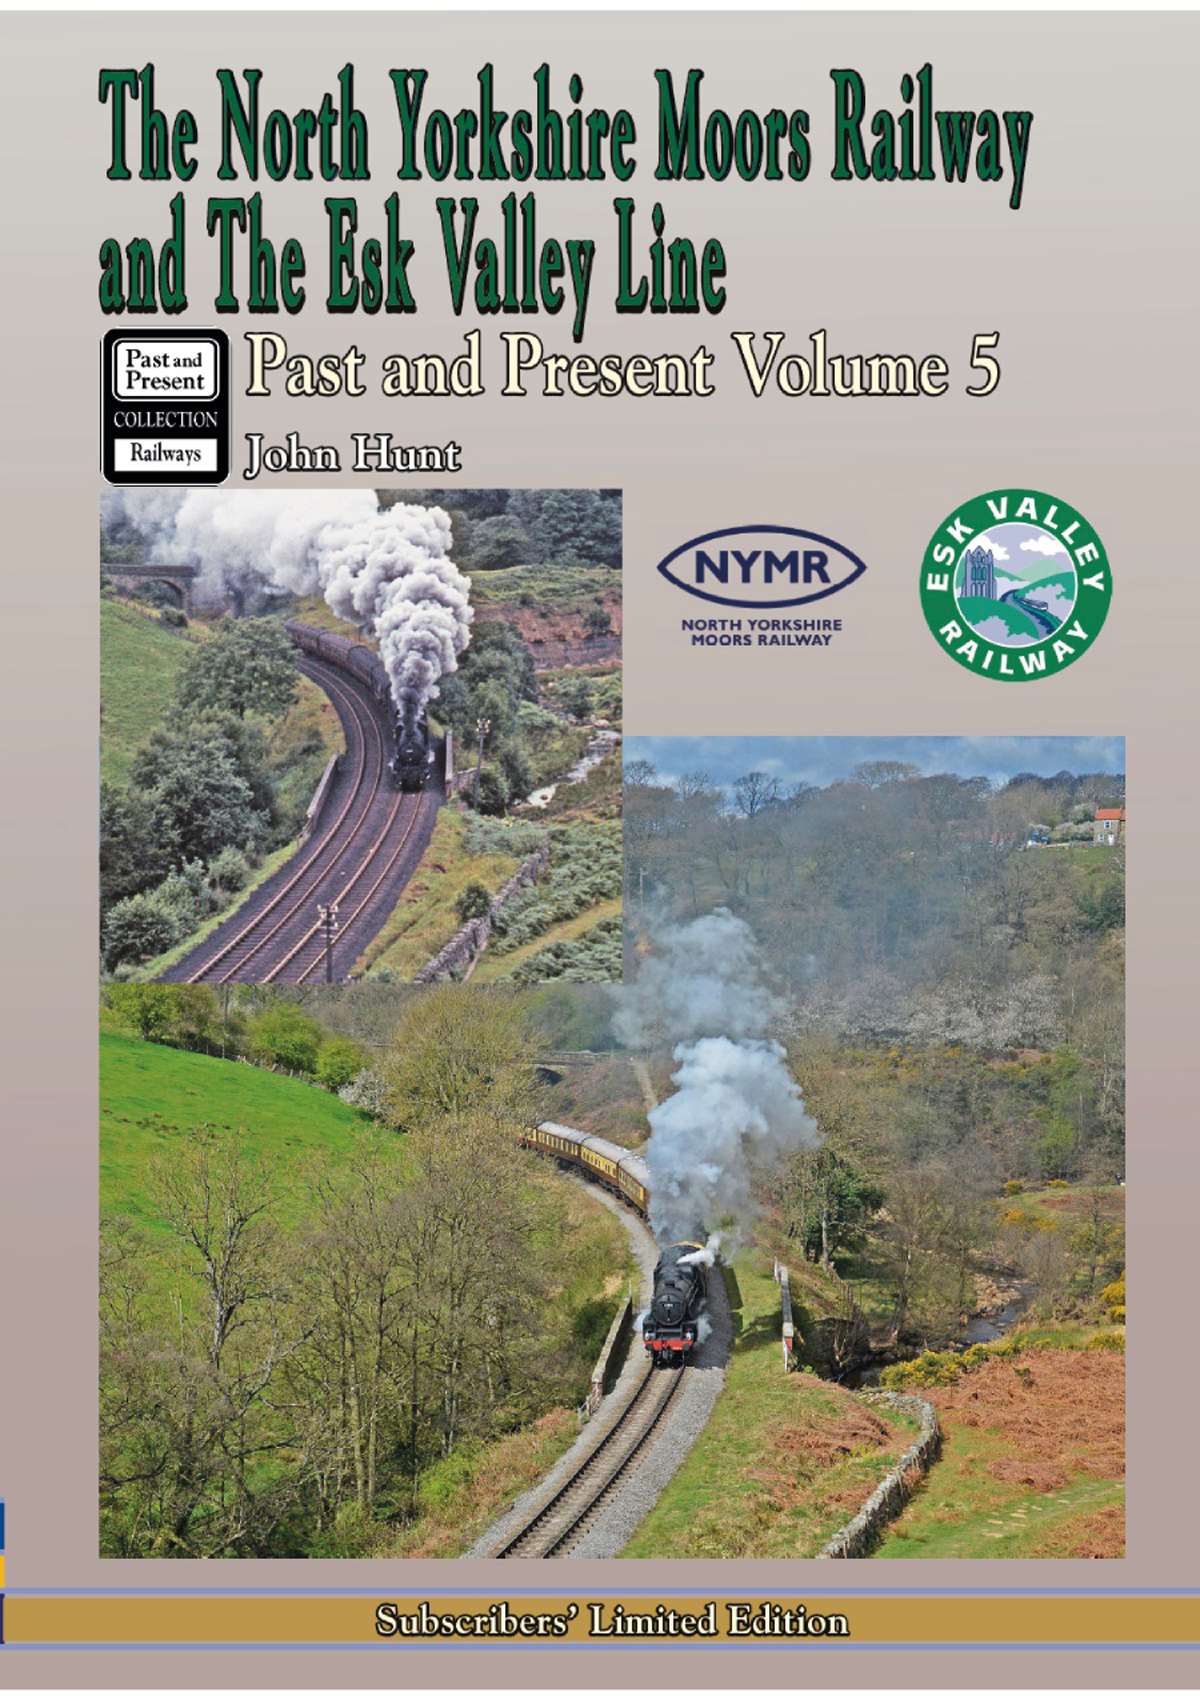 3014 - The NYMR & The Esk Valley Line Vol 5 Ltd edition